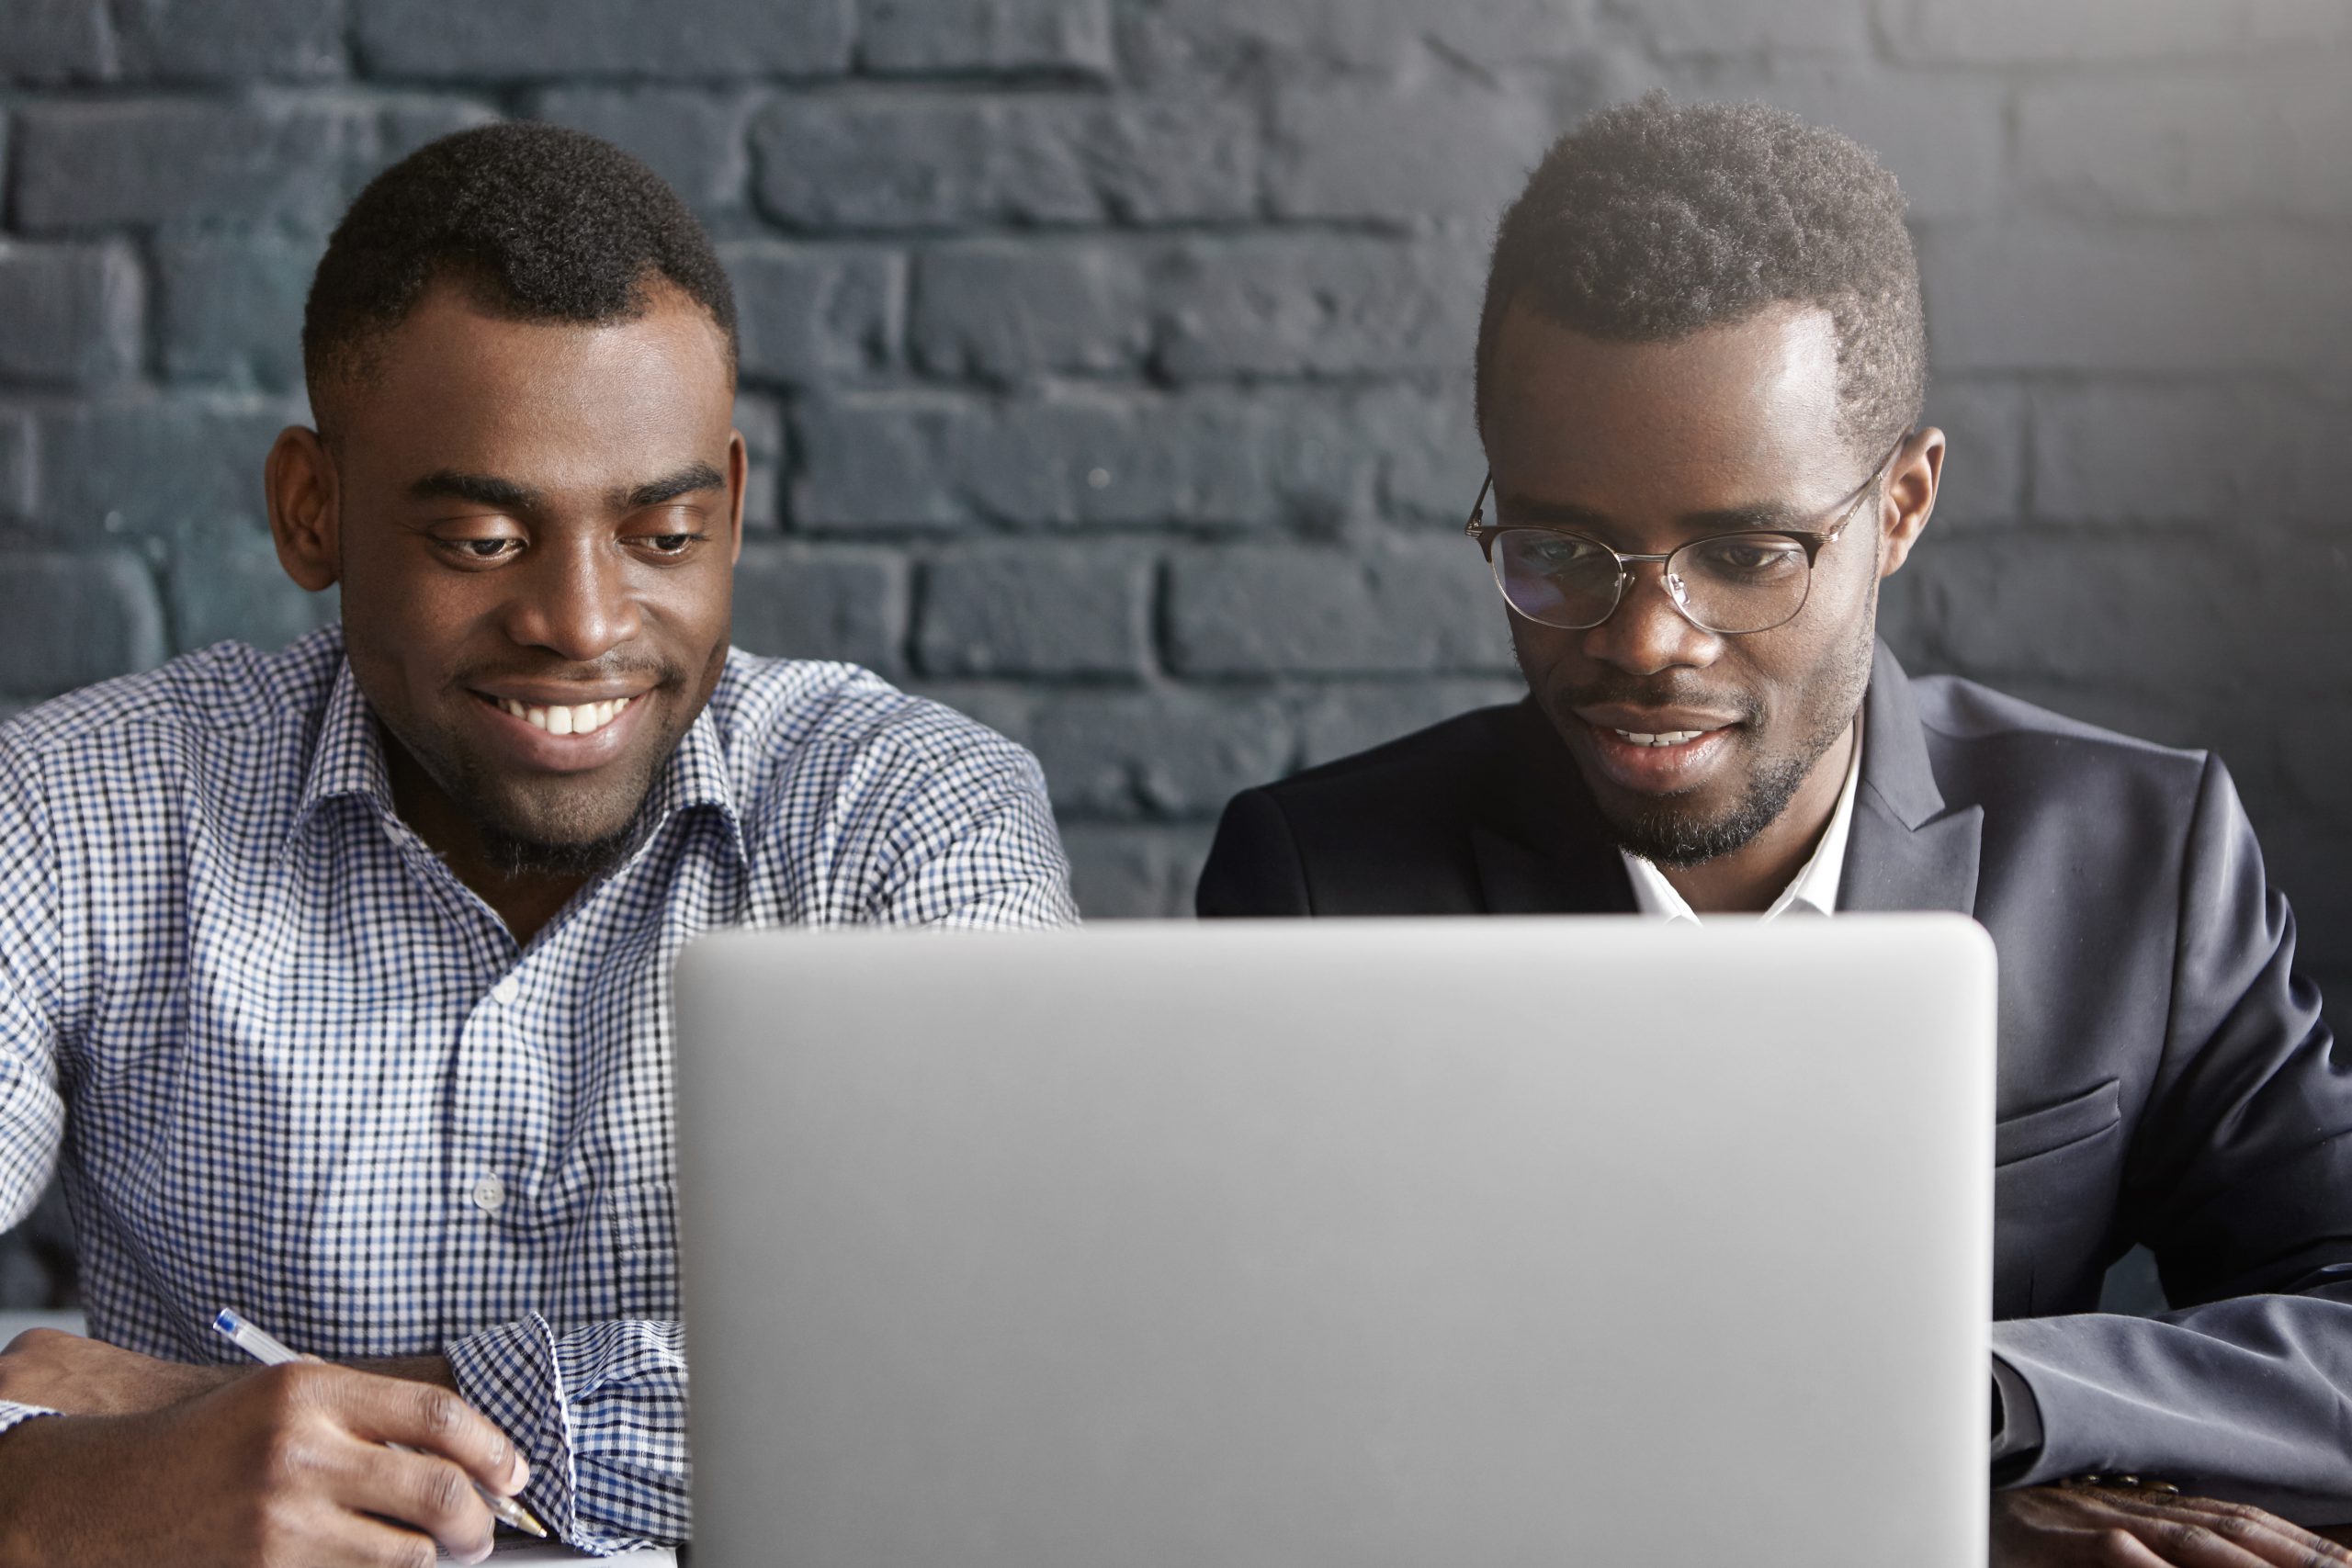 Two happy African colleagues using laptop. Manager in shirt showing presentation on notebook computer to his boss wearing suit and glasses, during meeting in modern office interior with brick walls